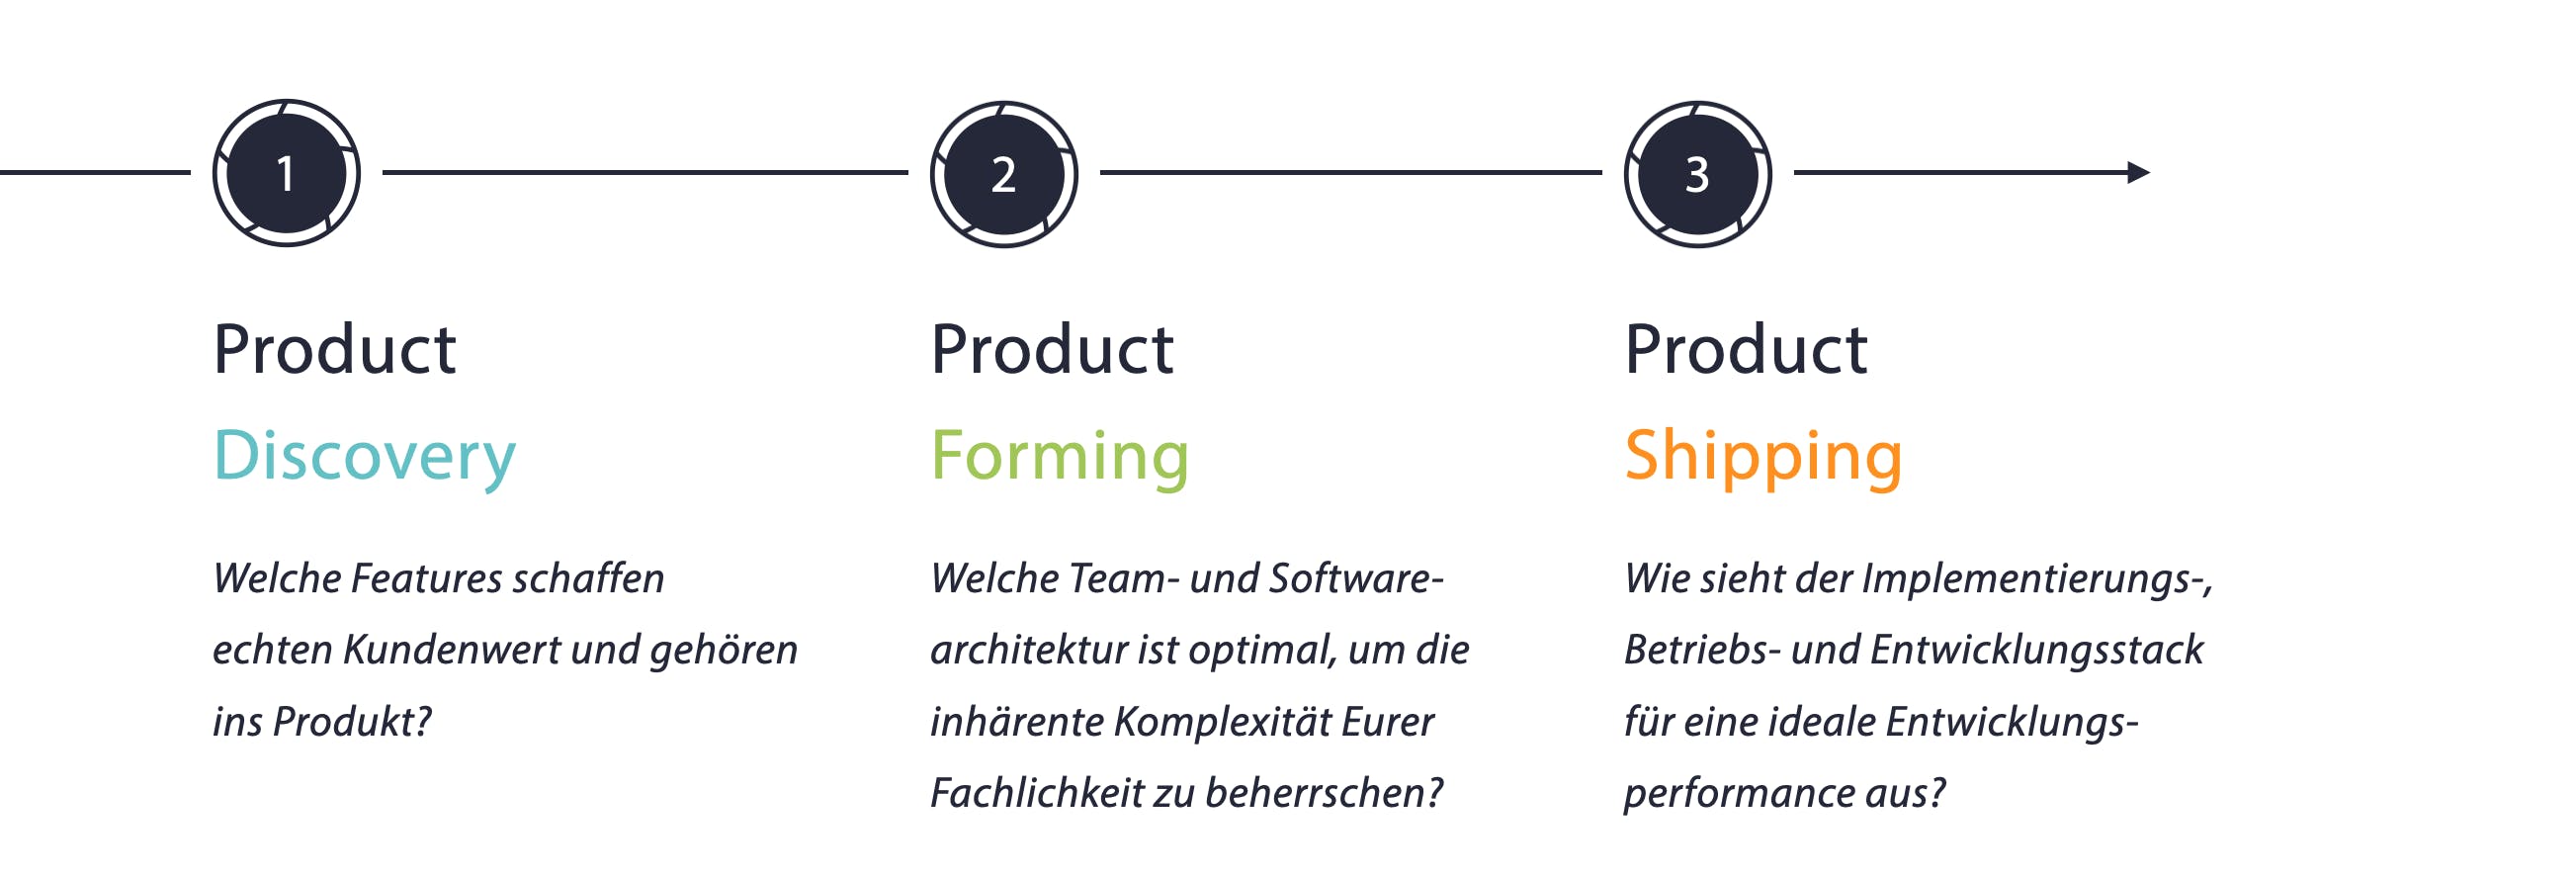 Die 3 wichtigen Bereiche der Software-Produktentwicklung (Product Discovery, Product Forming, Product Shipping)